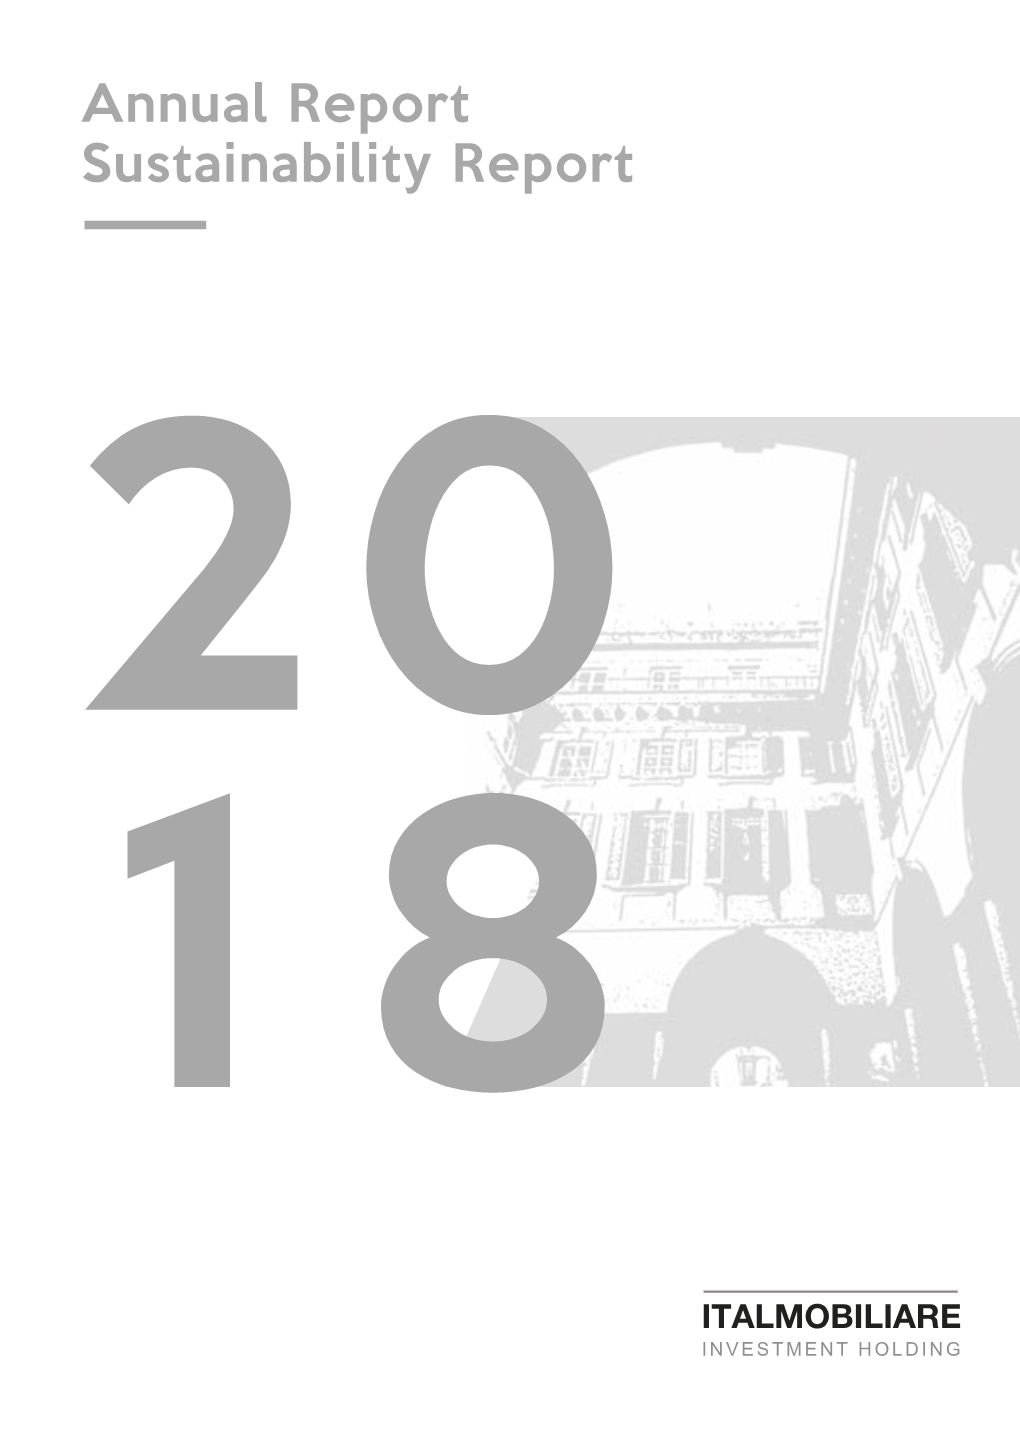 Annual Report Sustainability Report 20 1 8